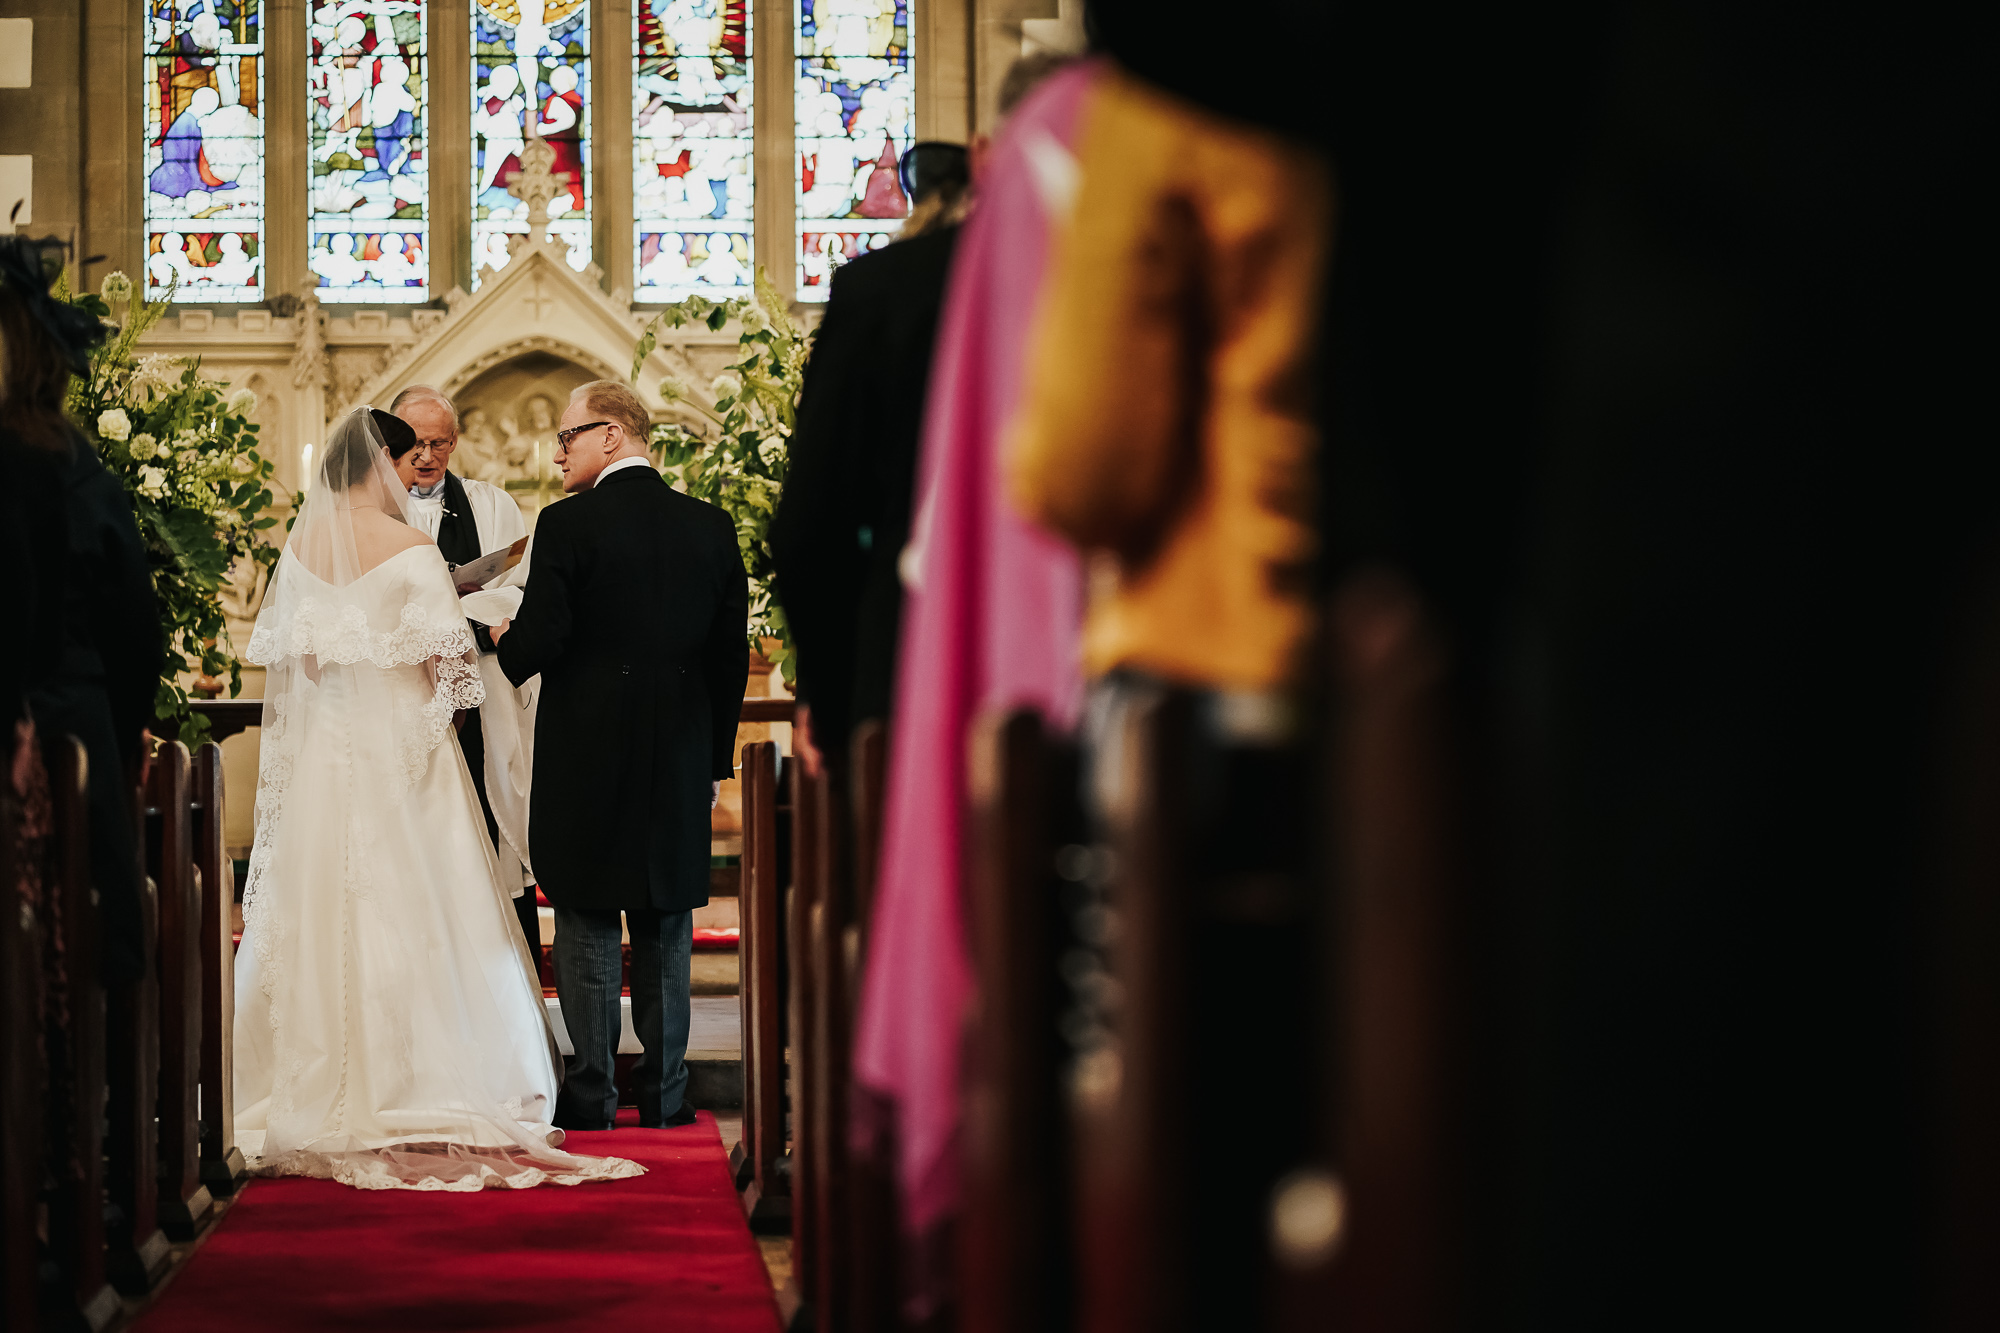 Cheshire wedding at home wedding photography (18 of 49).jpg